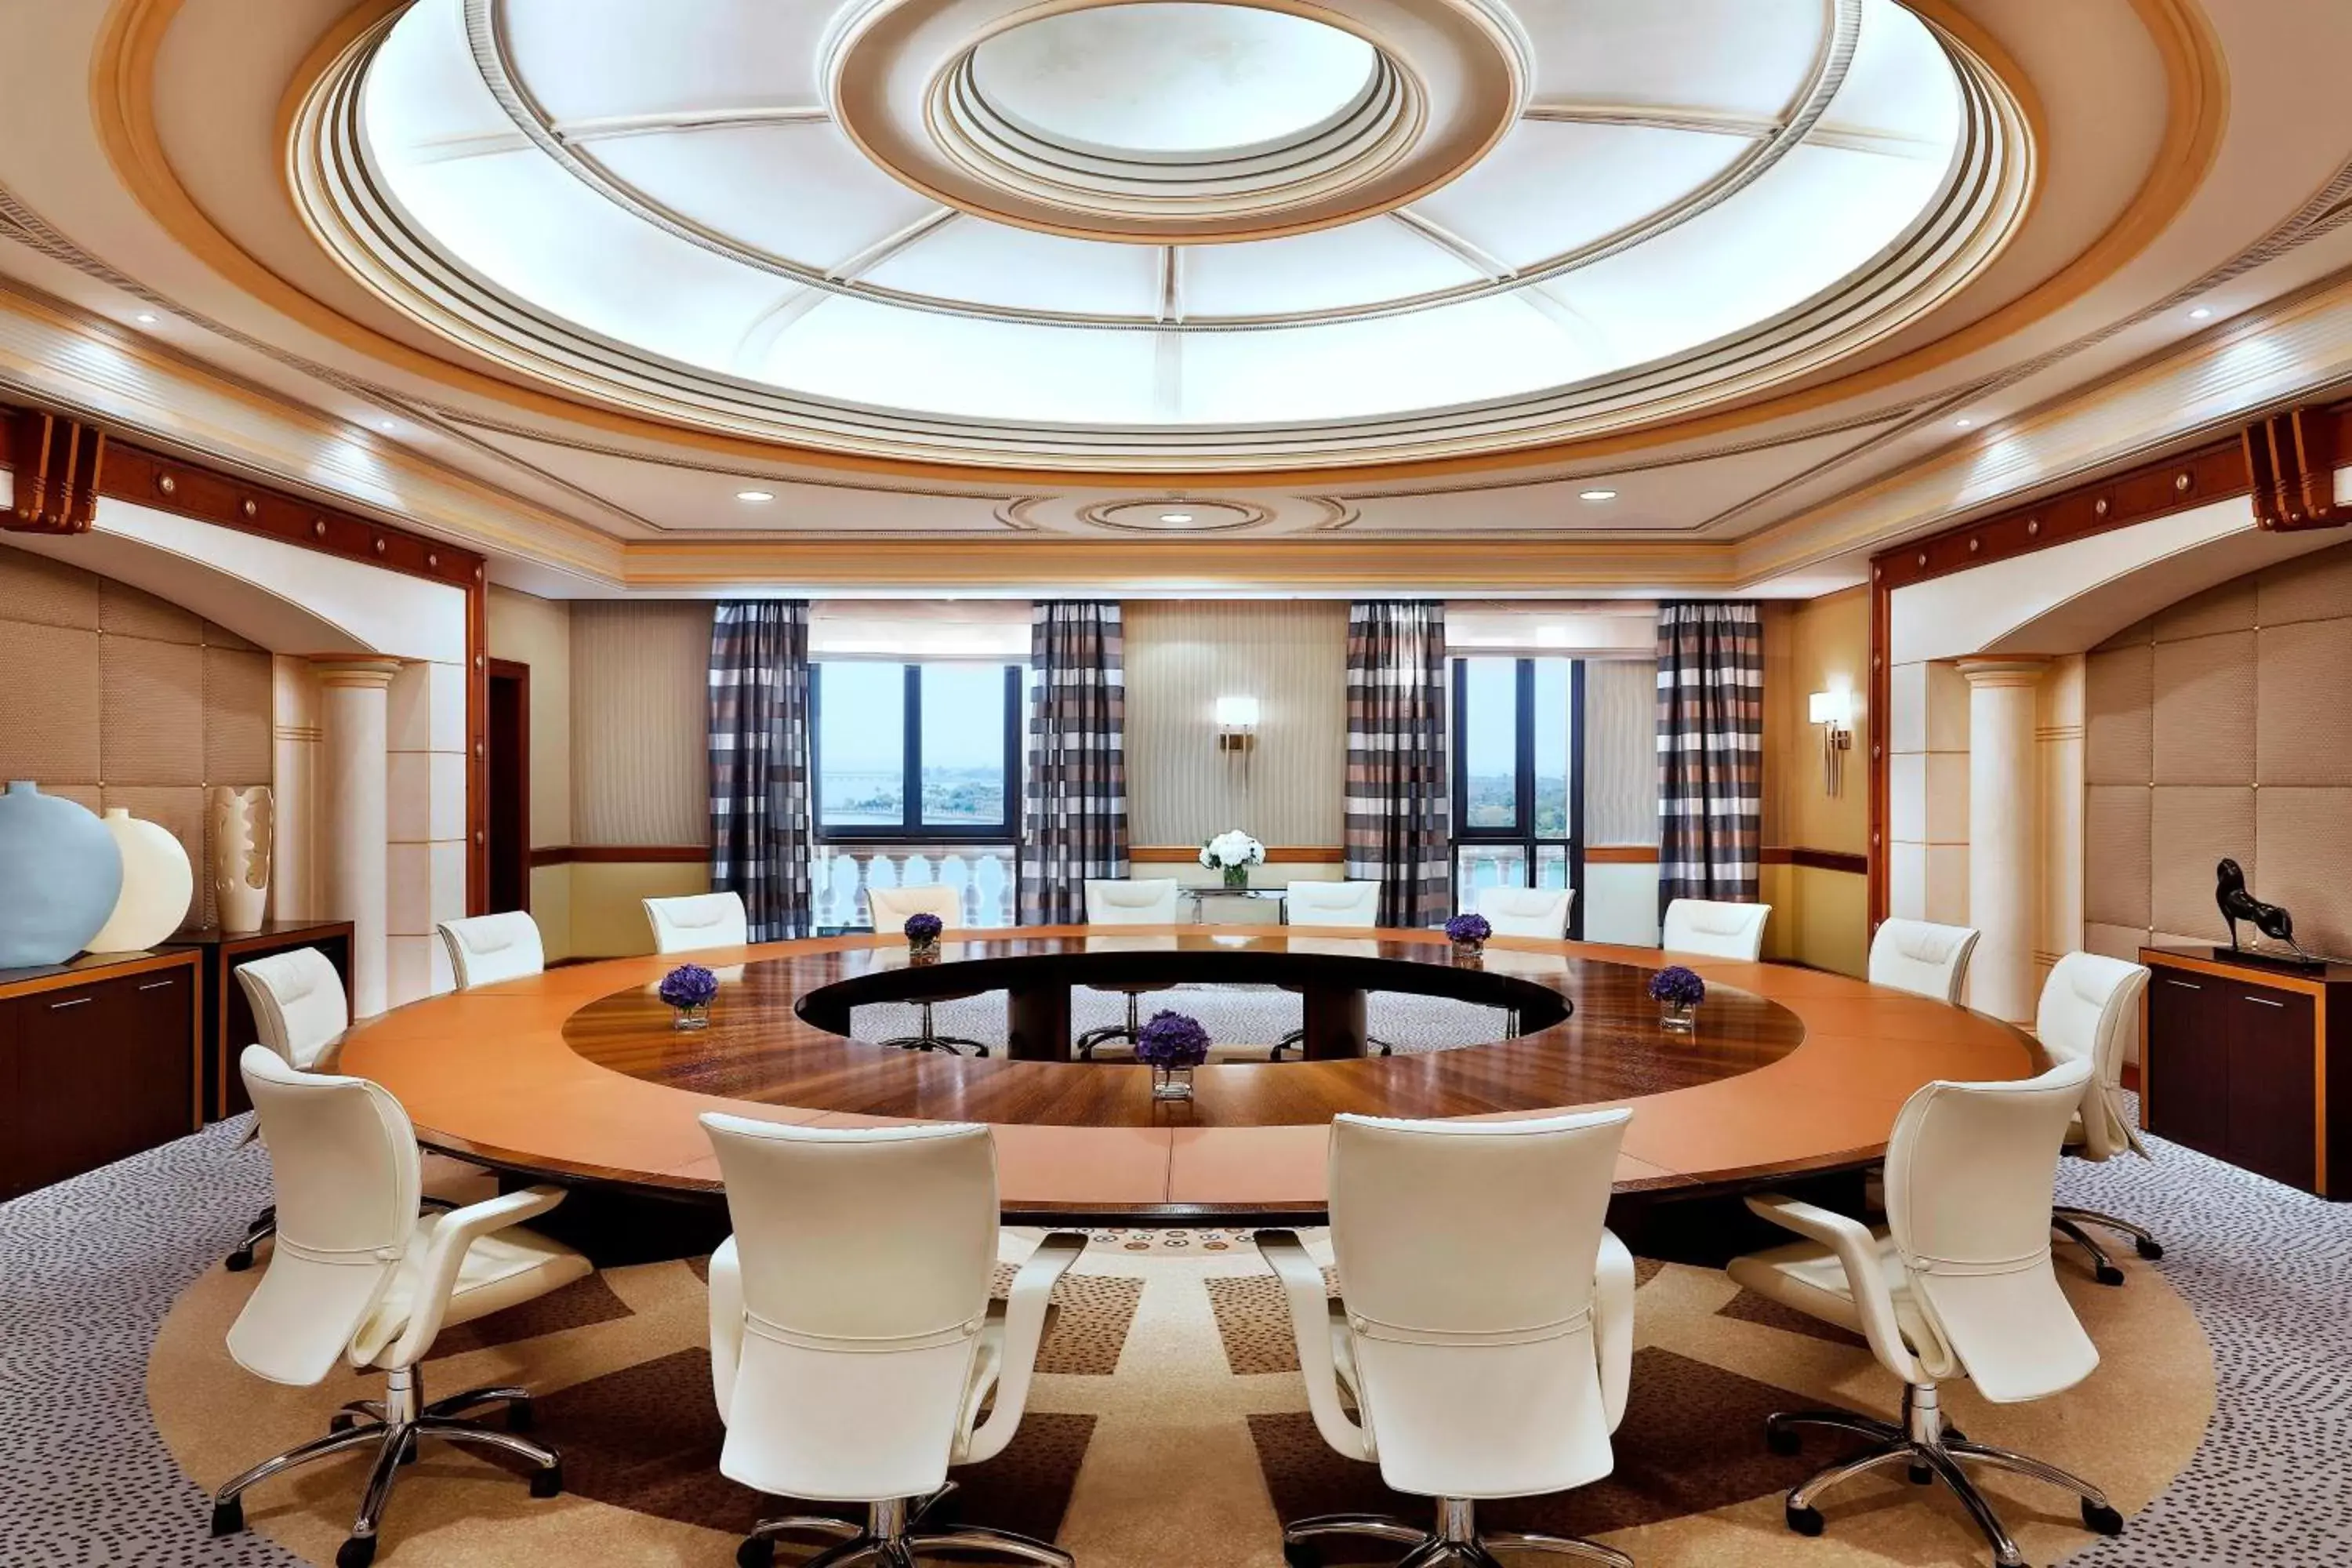 Meeting/conference room, Banquet Facilities in The Ritz-Carlton Jeddah